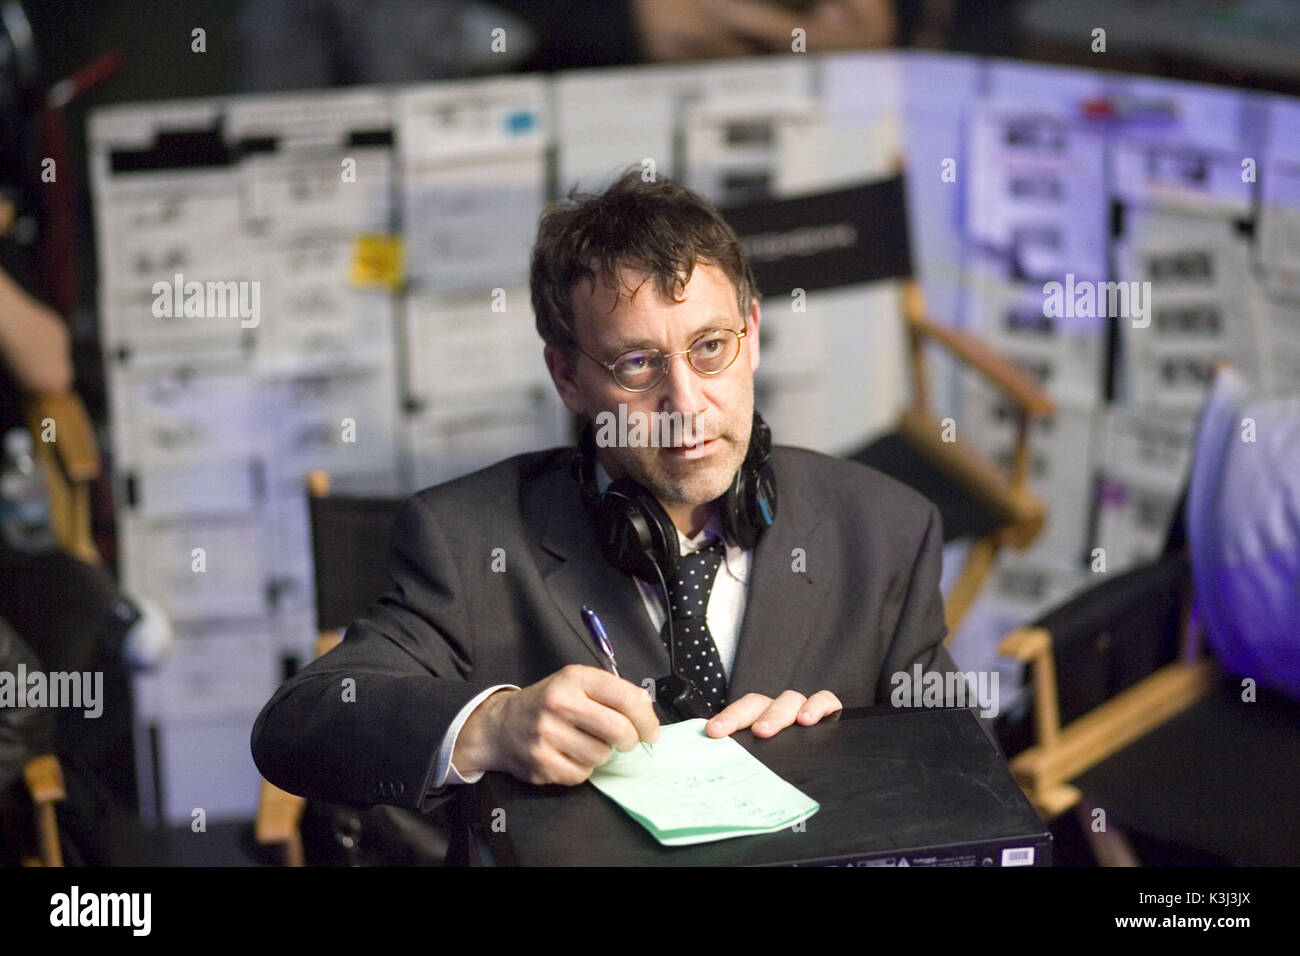 Director Sam Raimi during production of SPIDER-MAN 3. SPIDER-MAN 3 Director SAM RAIMI     Date: 2007 Stock Photo